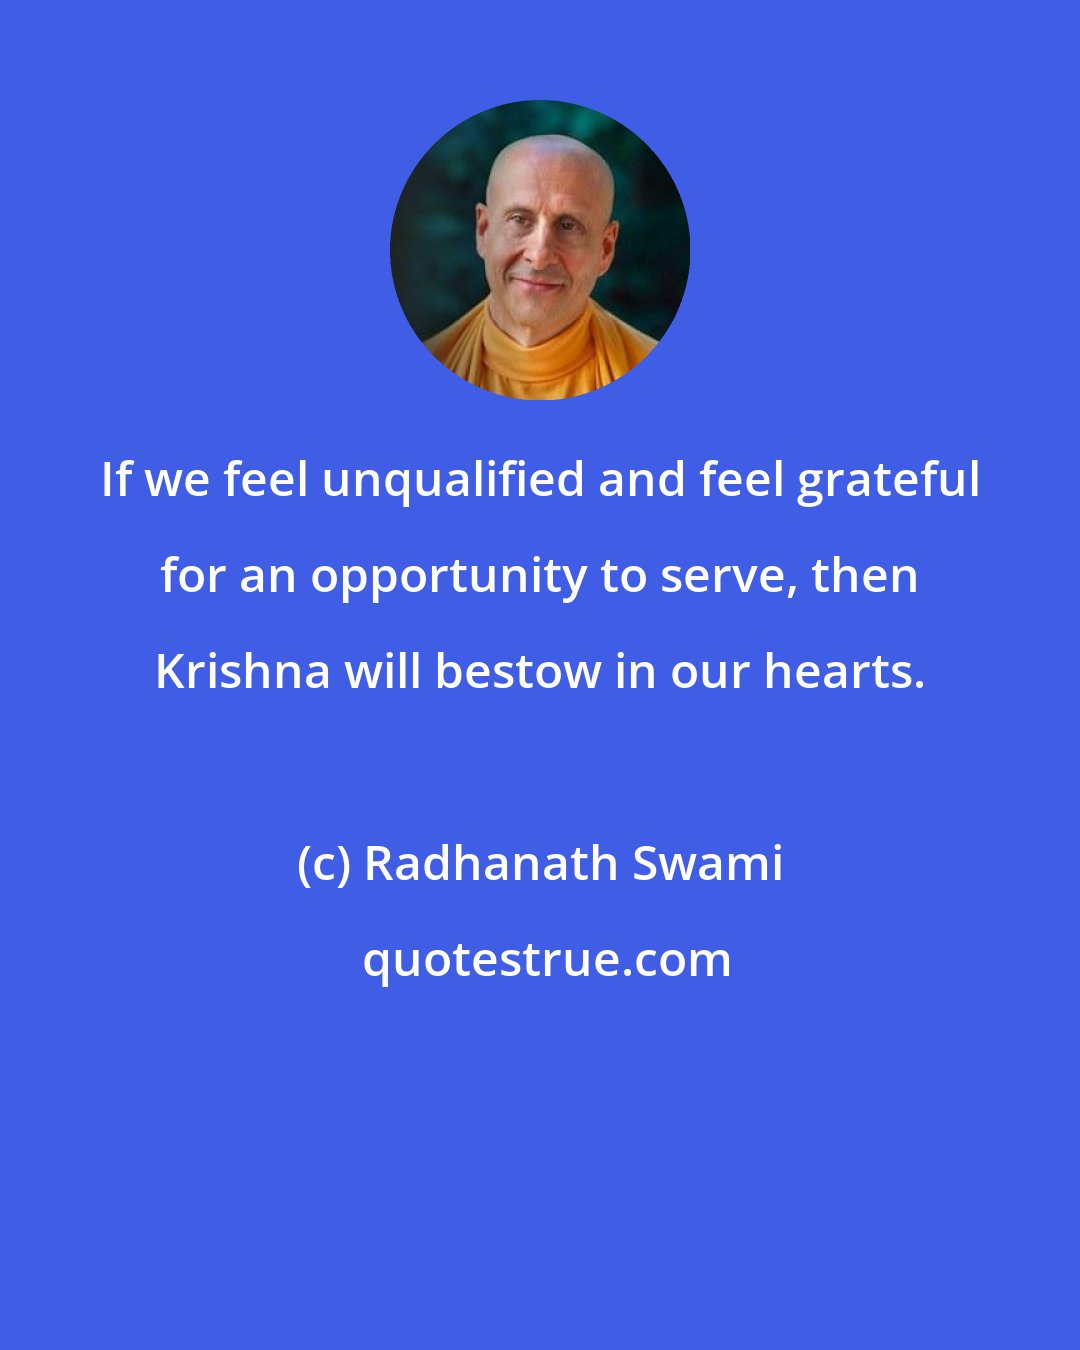 Radhanath Swami: If we feel unqualified and feel grateful for an opportunity to serve, then Krishna will bestow in our hearts.